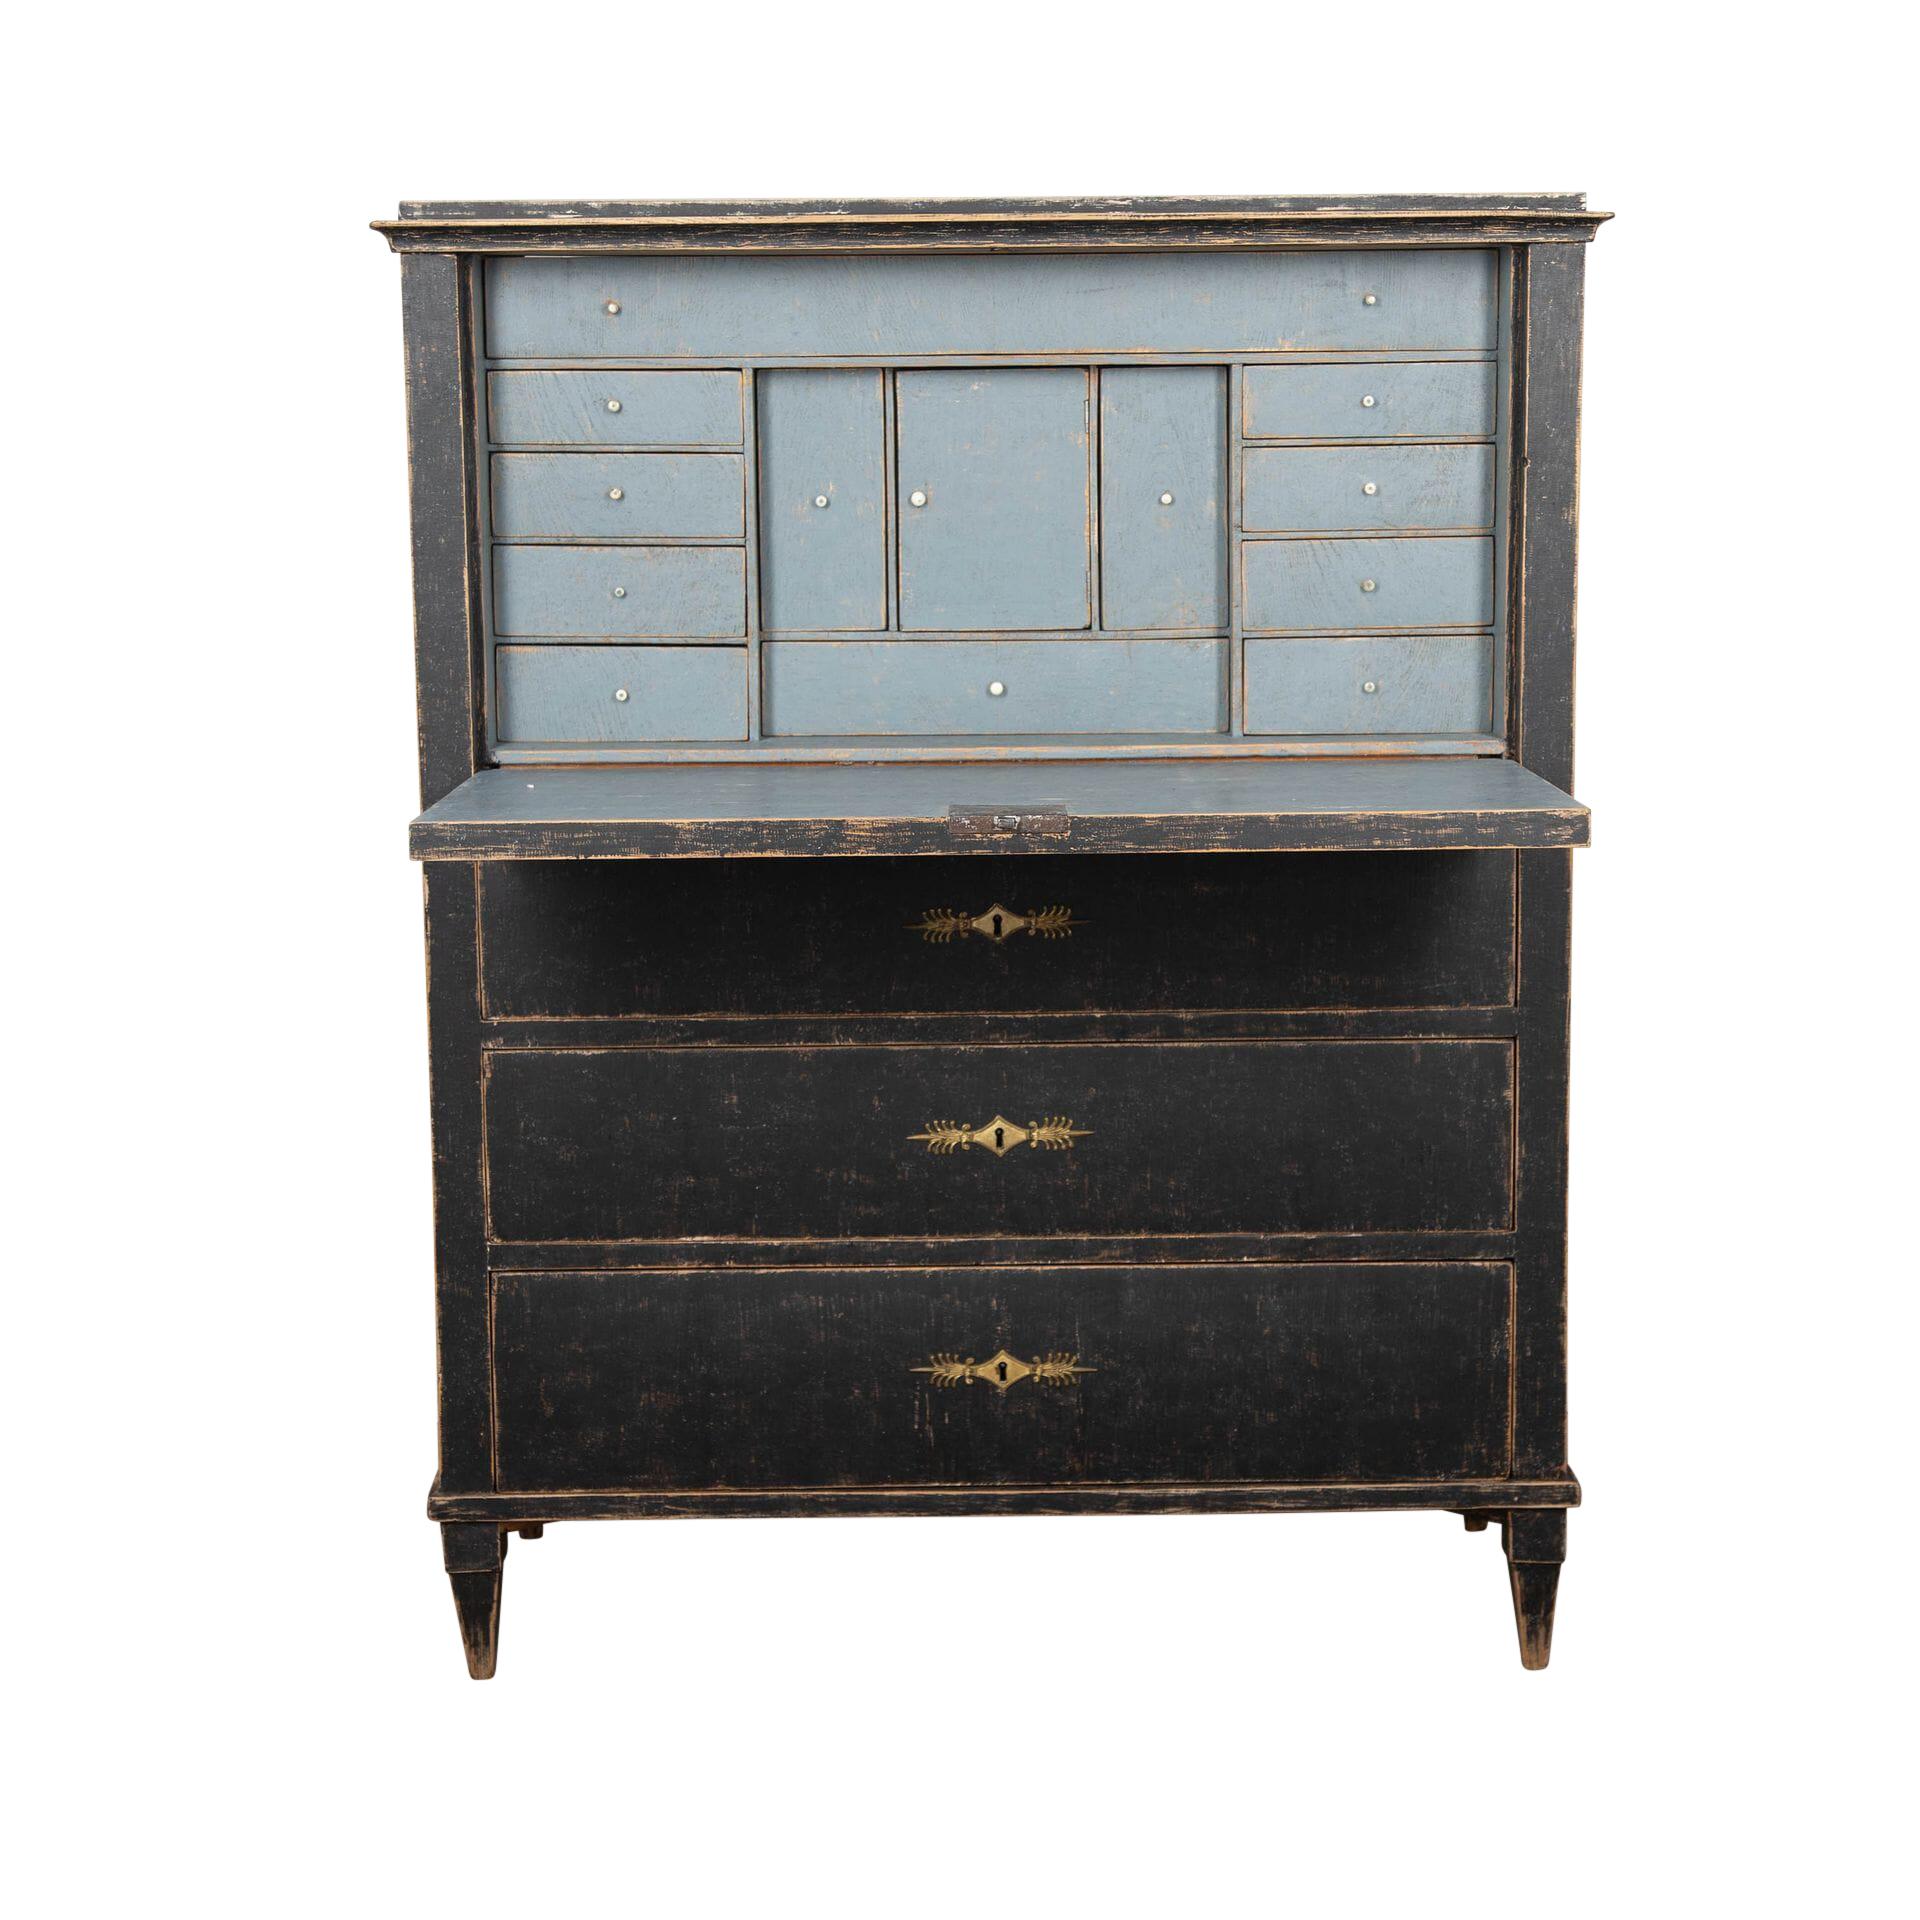 19th century Gustavian period desk, top section has a fall front, opening to a desk space and drawers, below three full width drawers.
Repainted in black its blue interior, original hardware.
